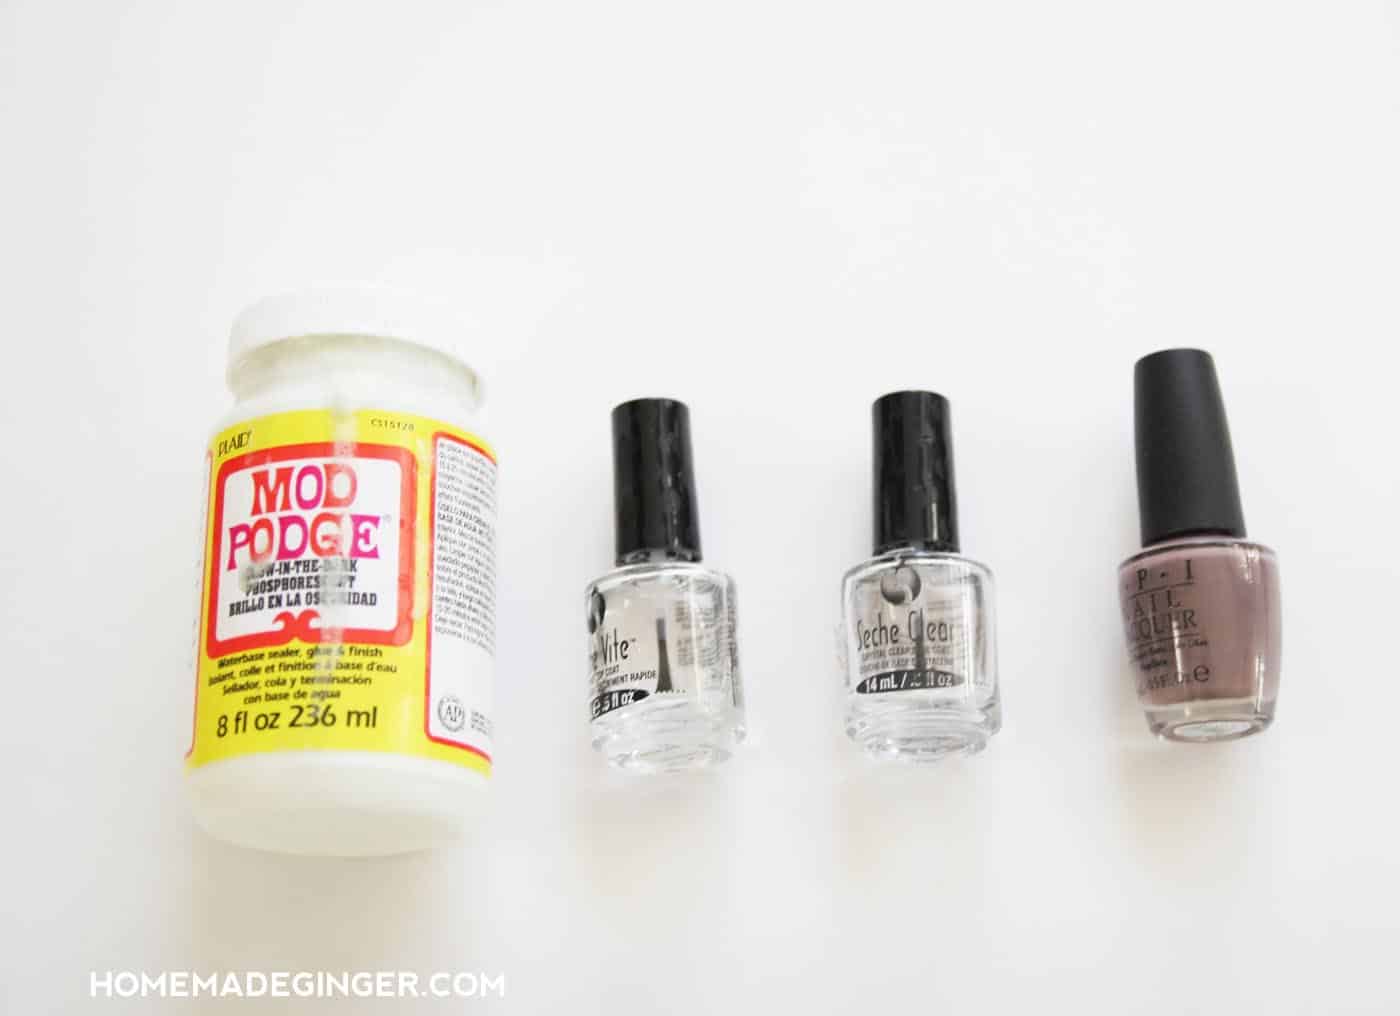 Glow in the Dark Mod Podge and clear nail polish